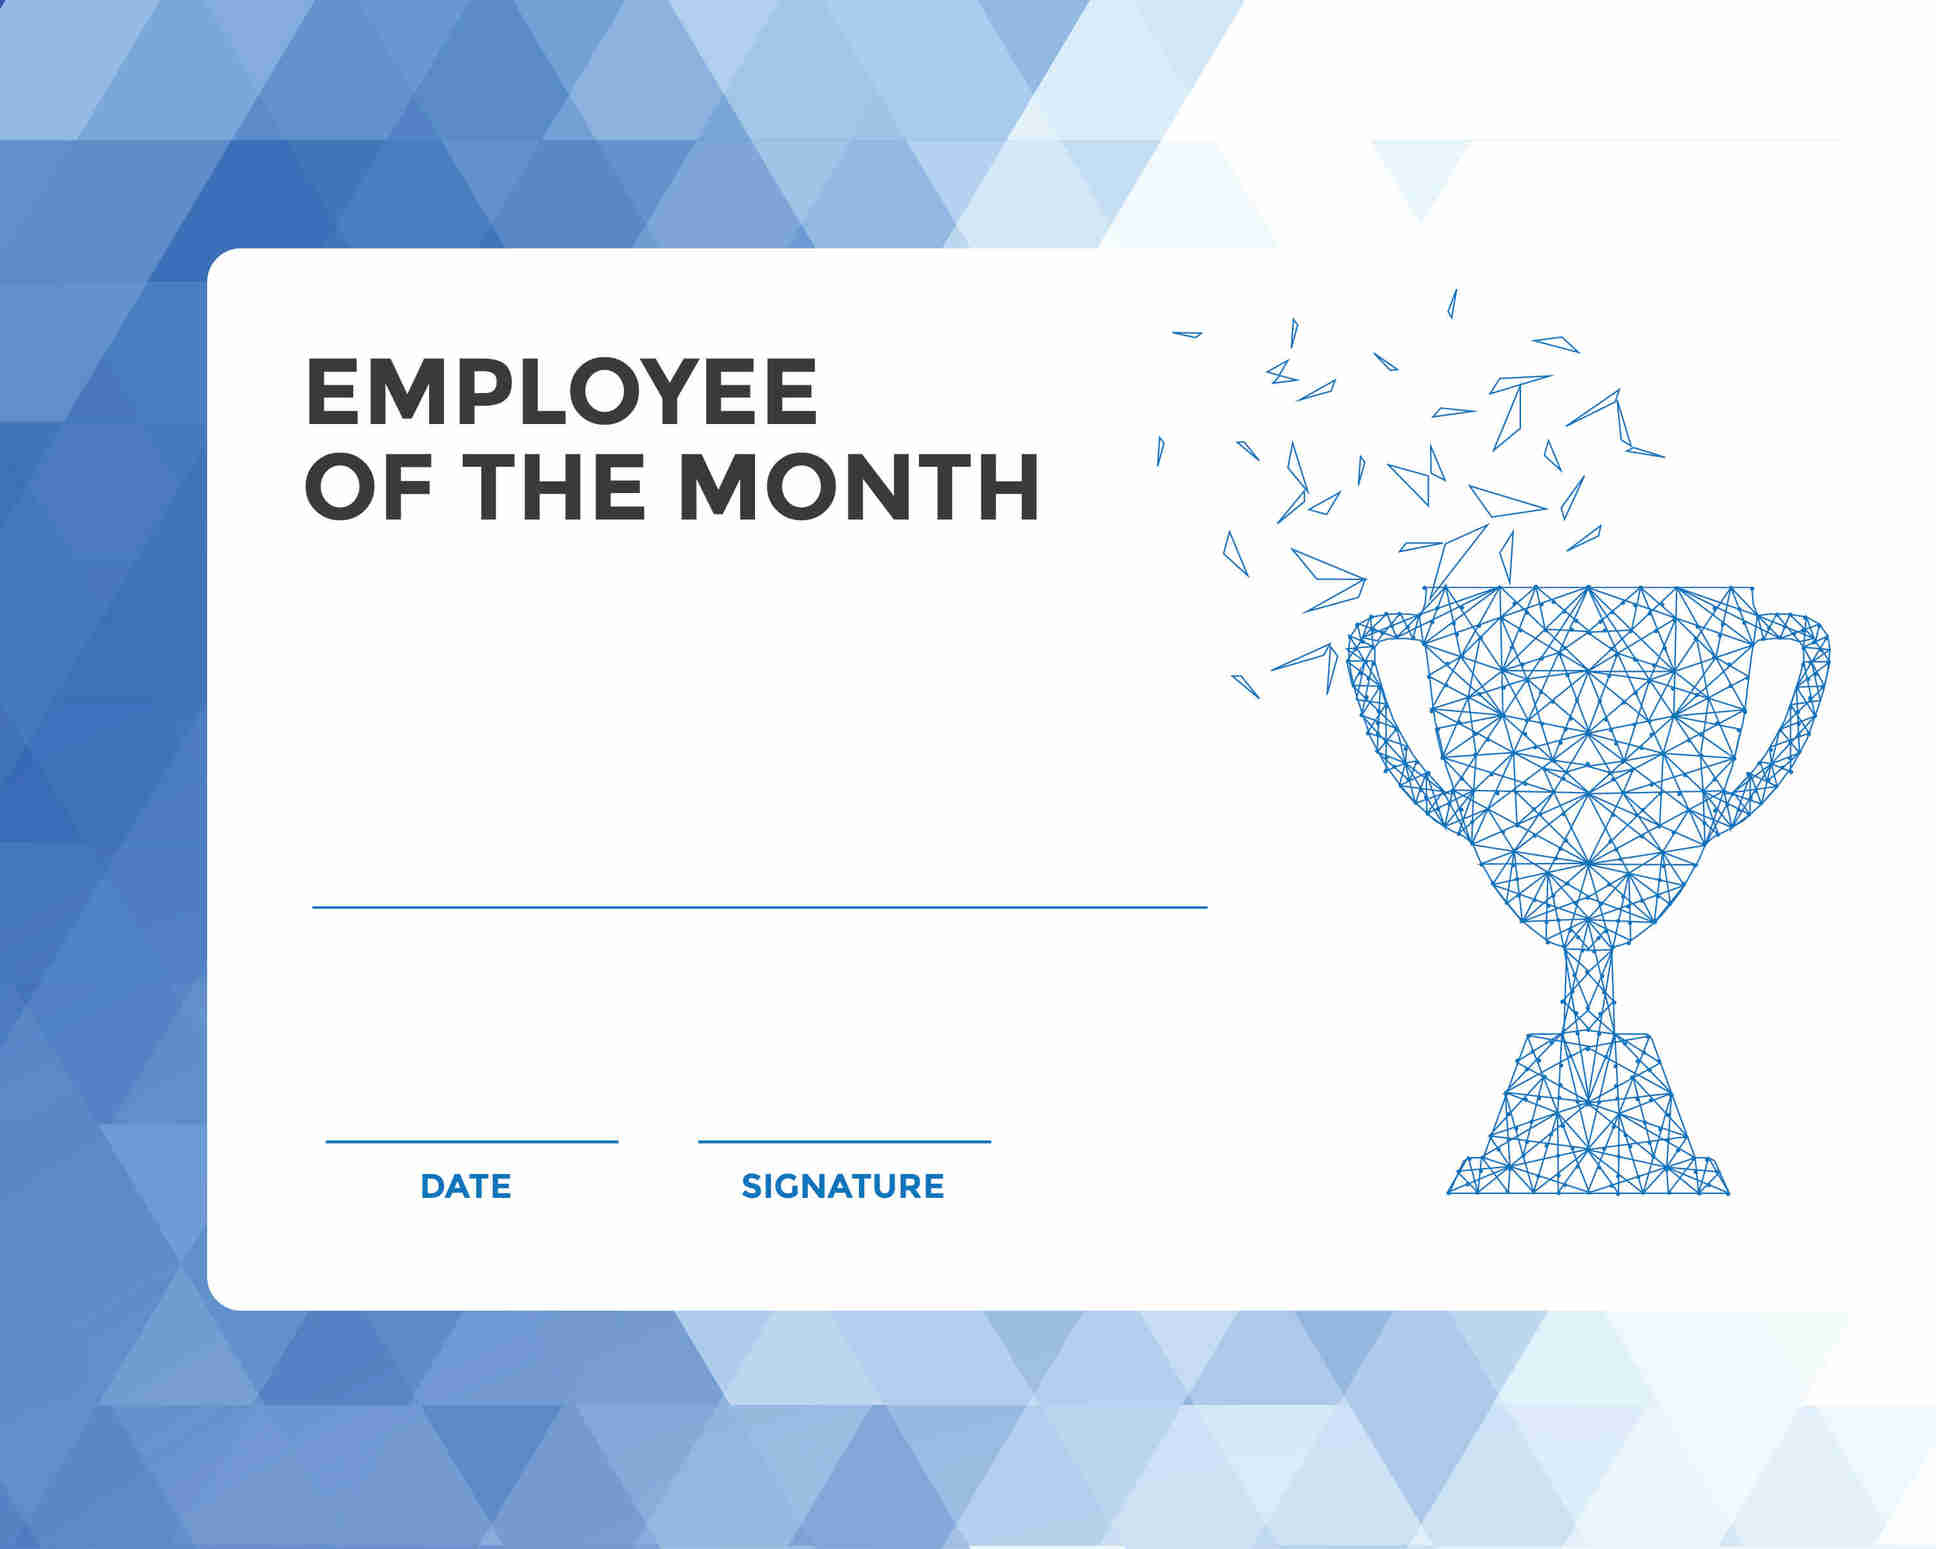 10 Amazing Award Certificate Templates in 10 - Recognize With Employee Of The Month Certificate Templates